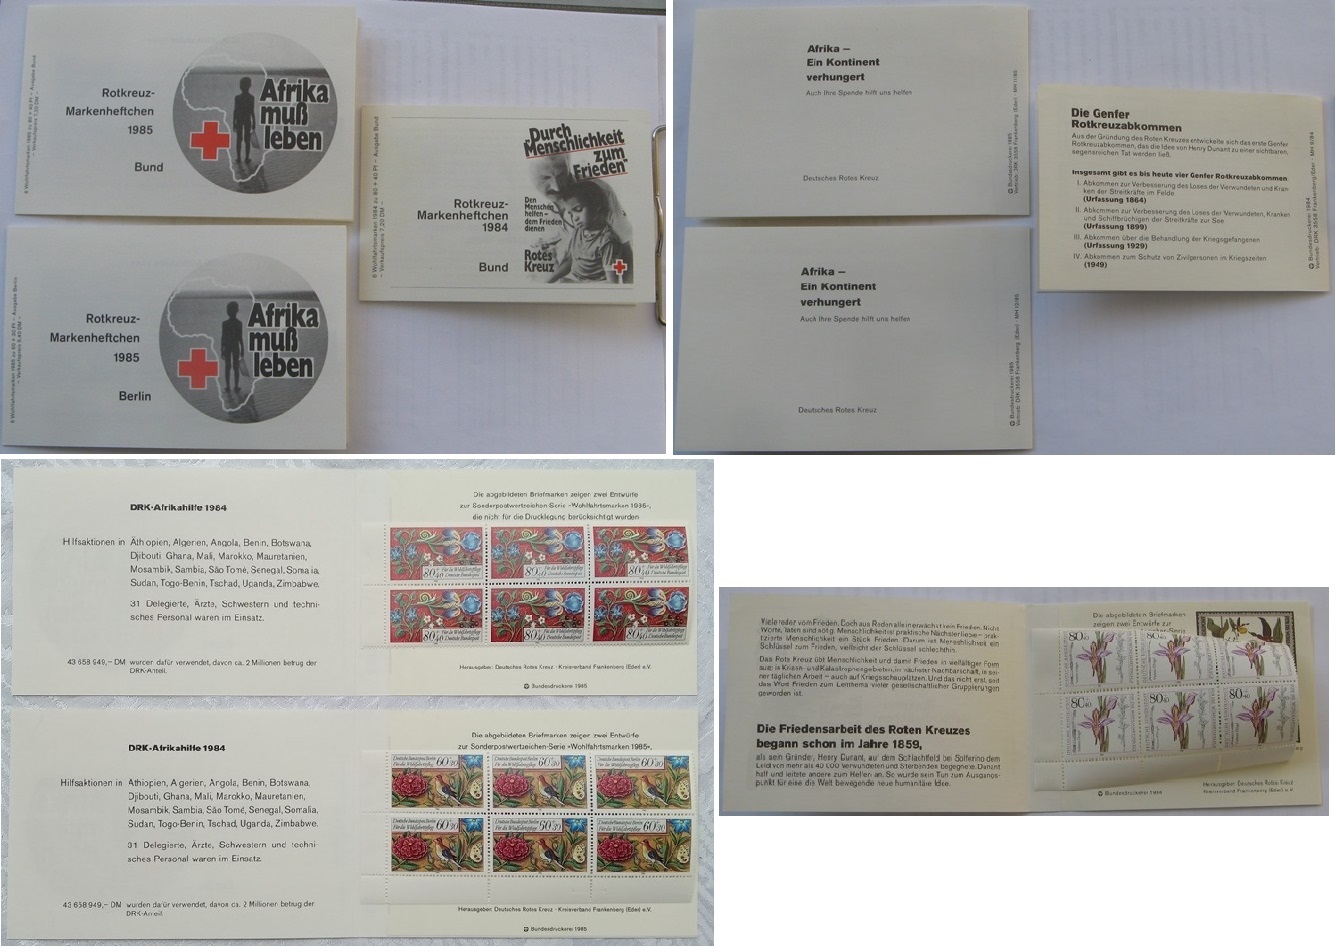  1984-1985, Germany, Red Cross, 3 stamp booklets MH 6 (Mi 745+1260+1227),MNH   